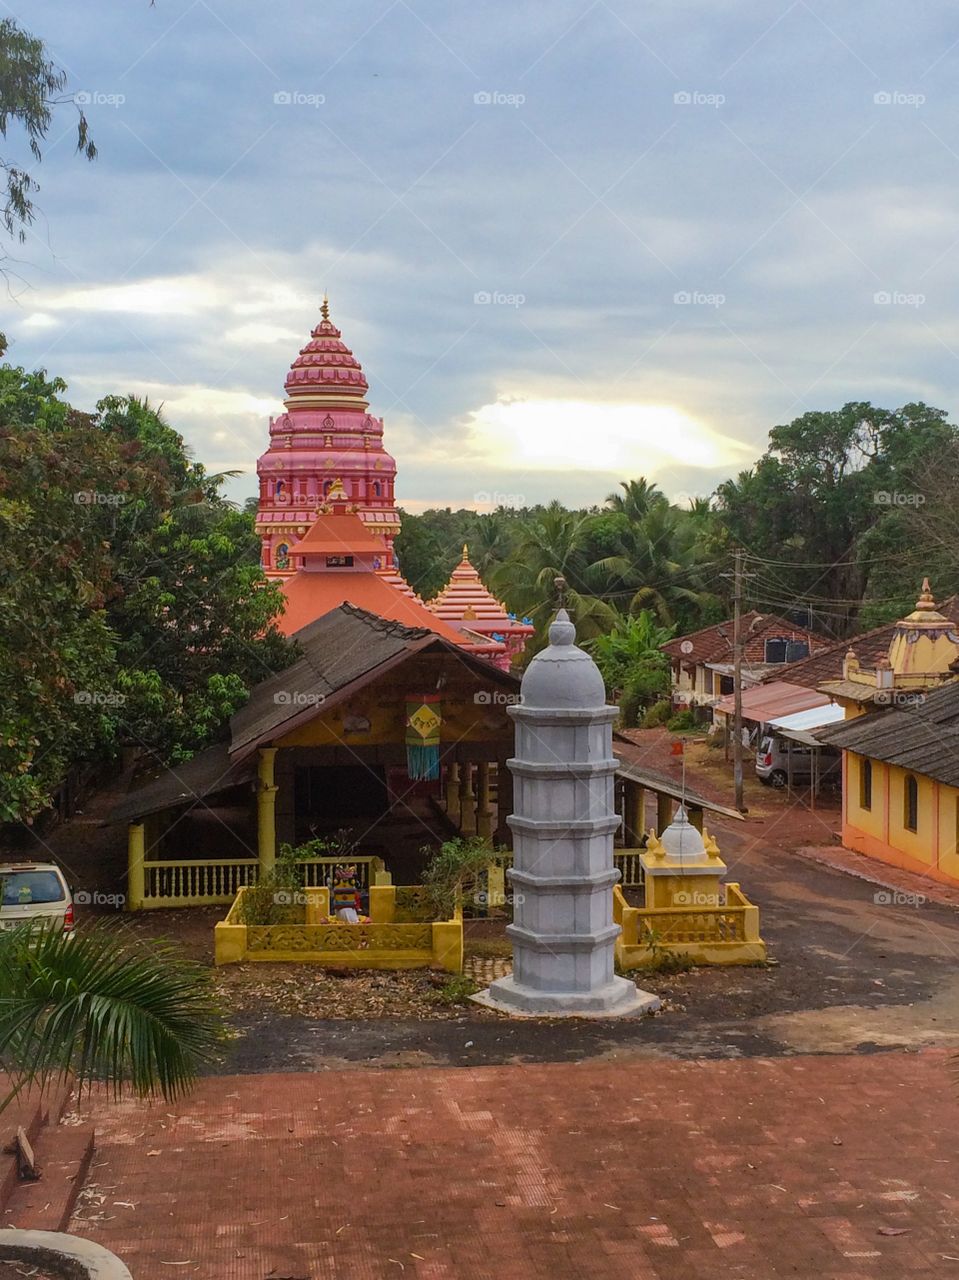 Hindu temple in Goa . One of the numerous 